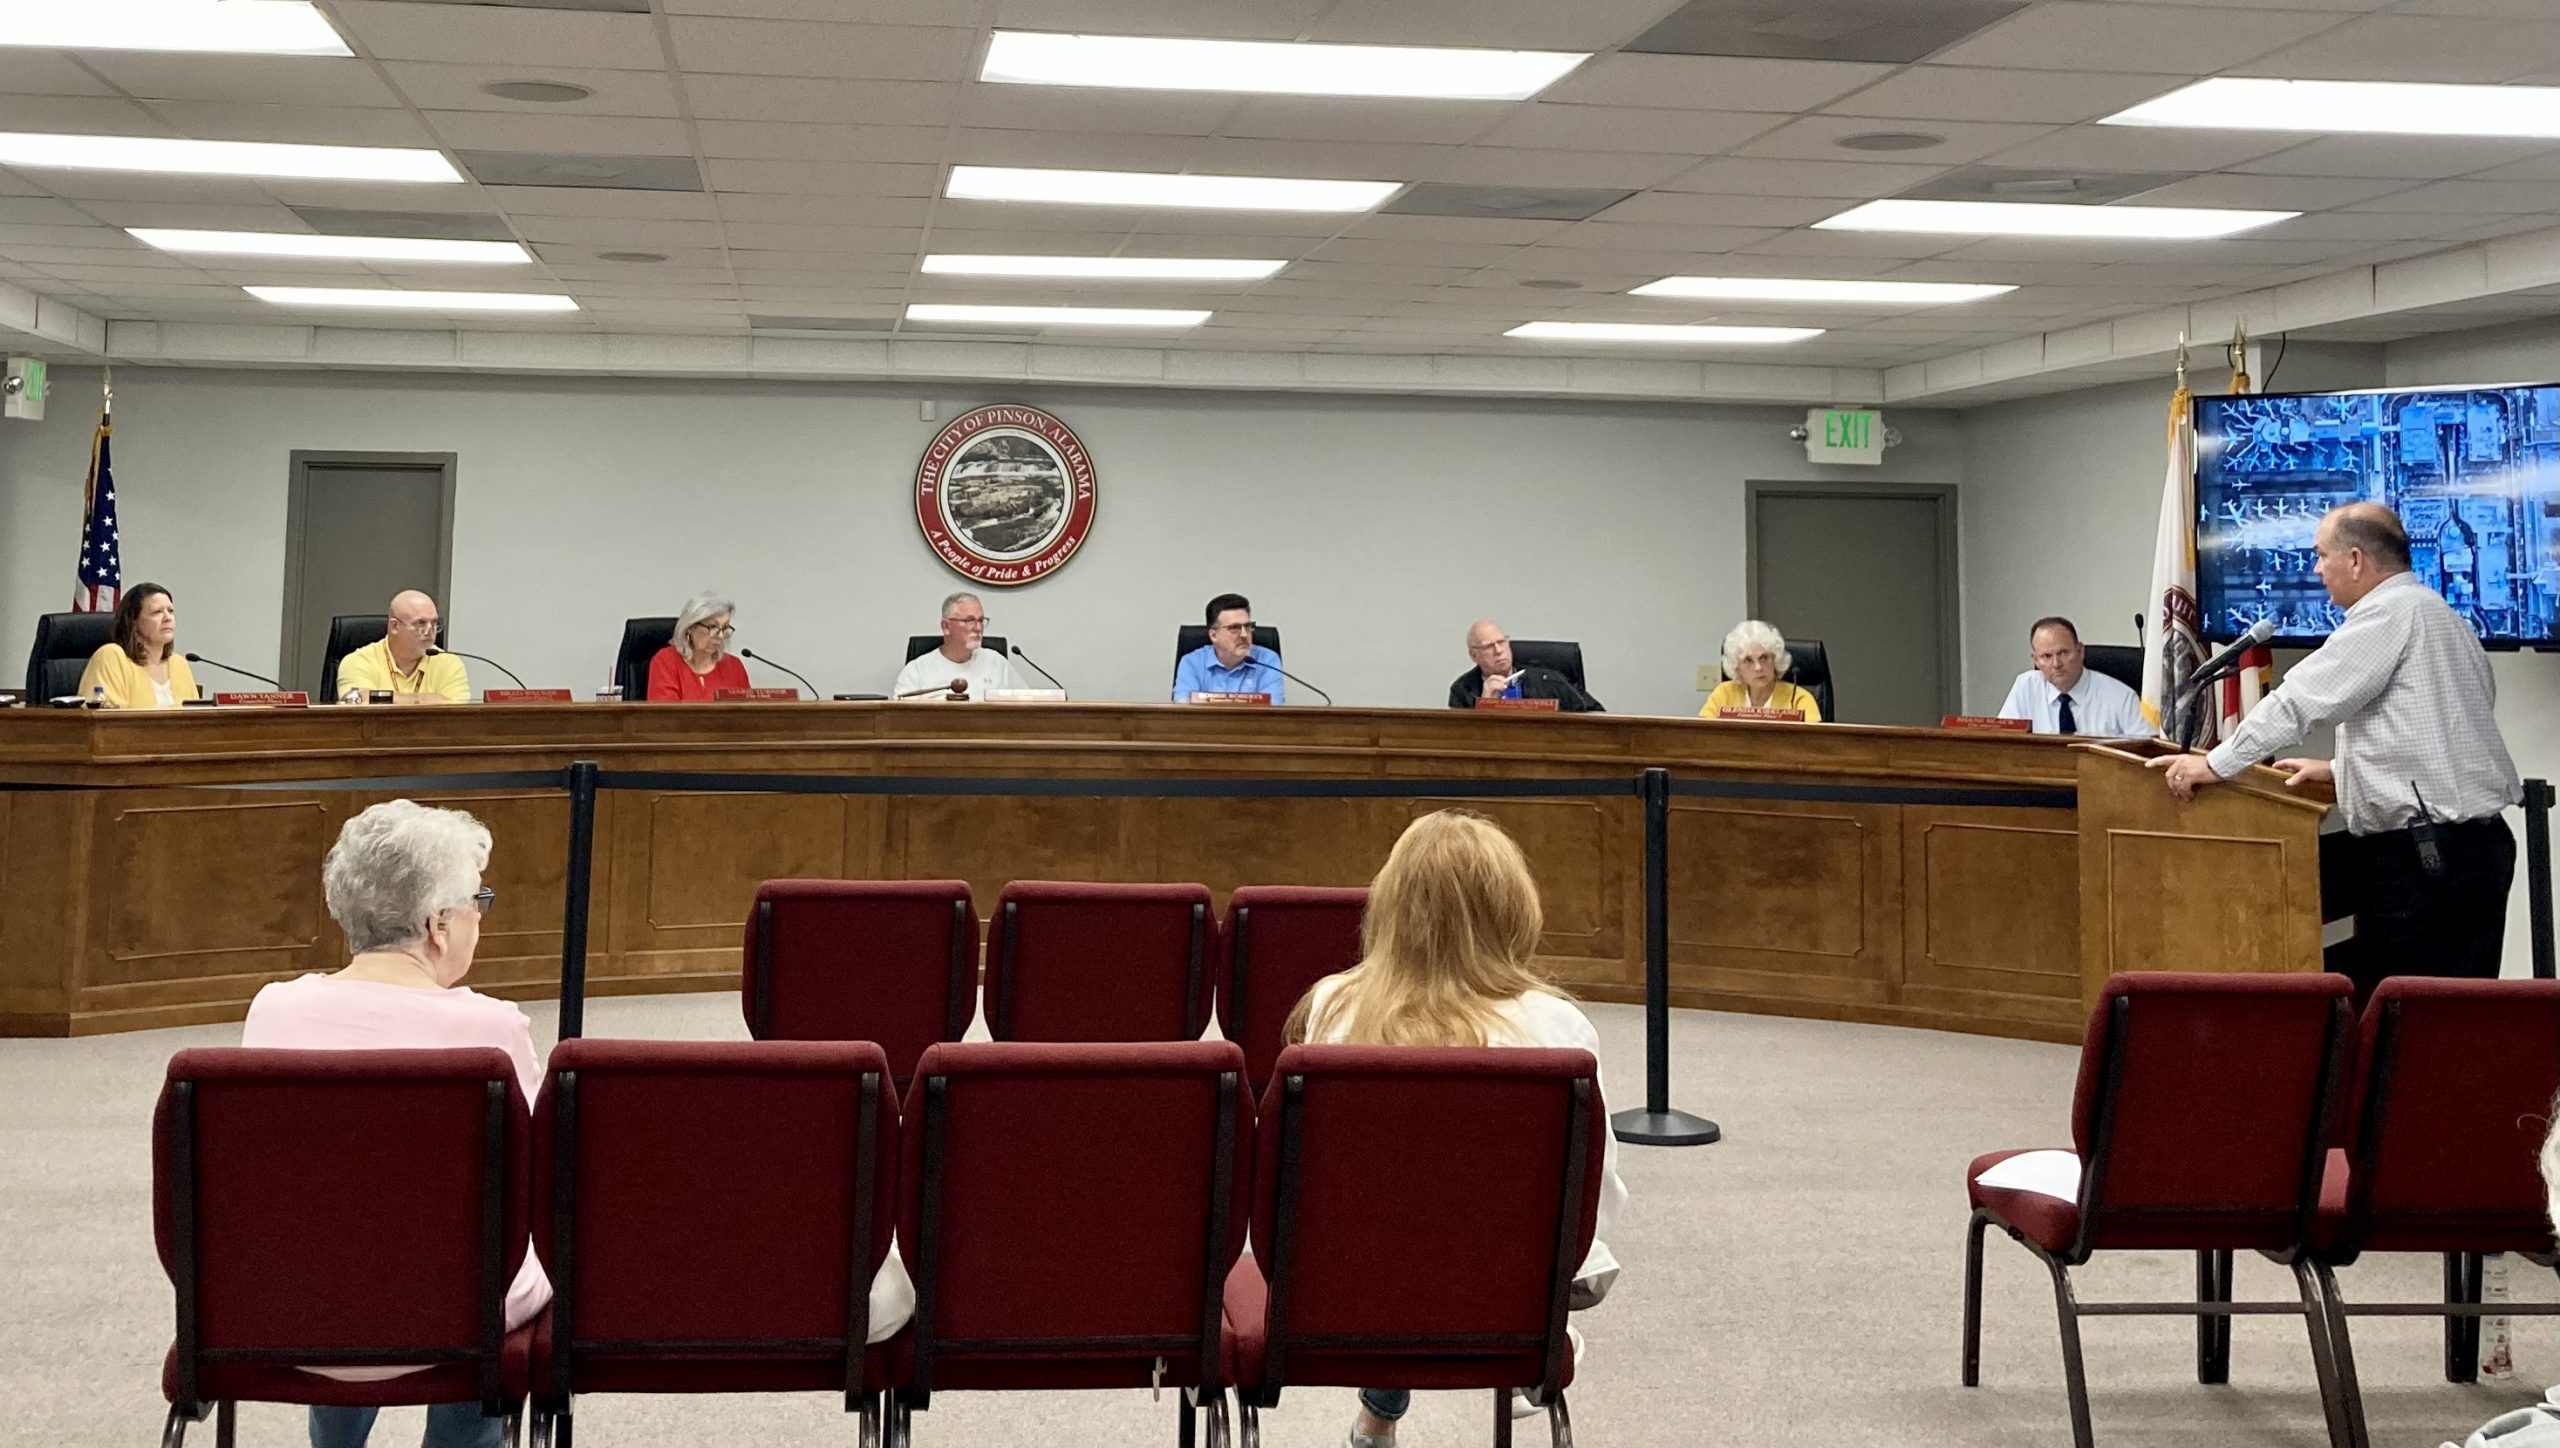 Pinson Council approves $95,000 grant for CPFD training facility